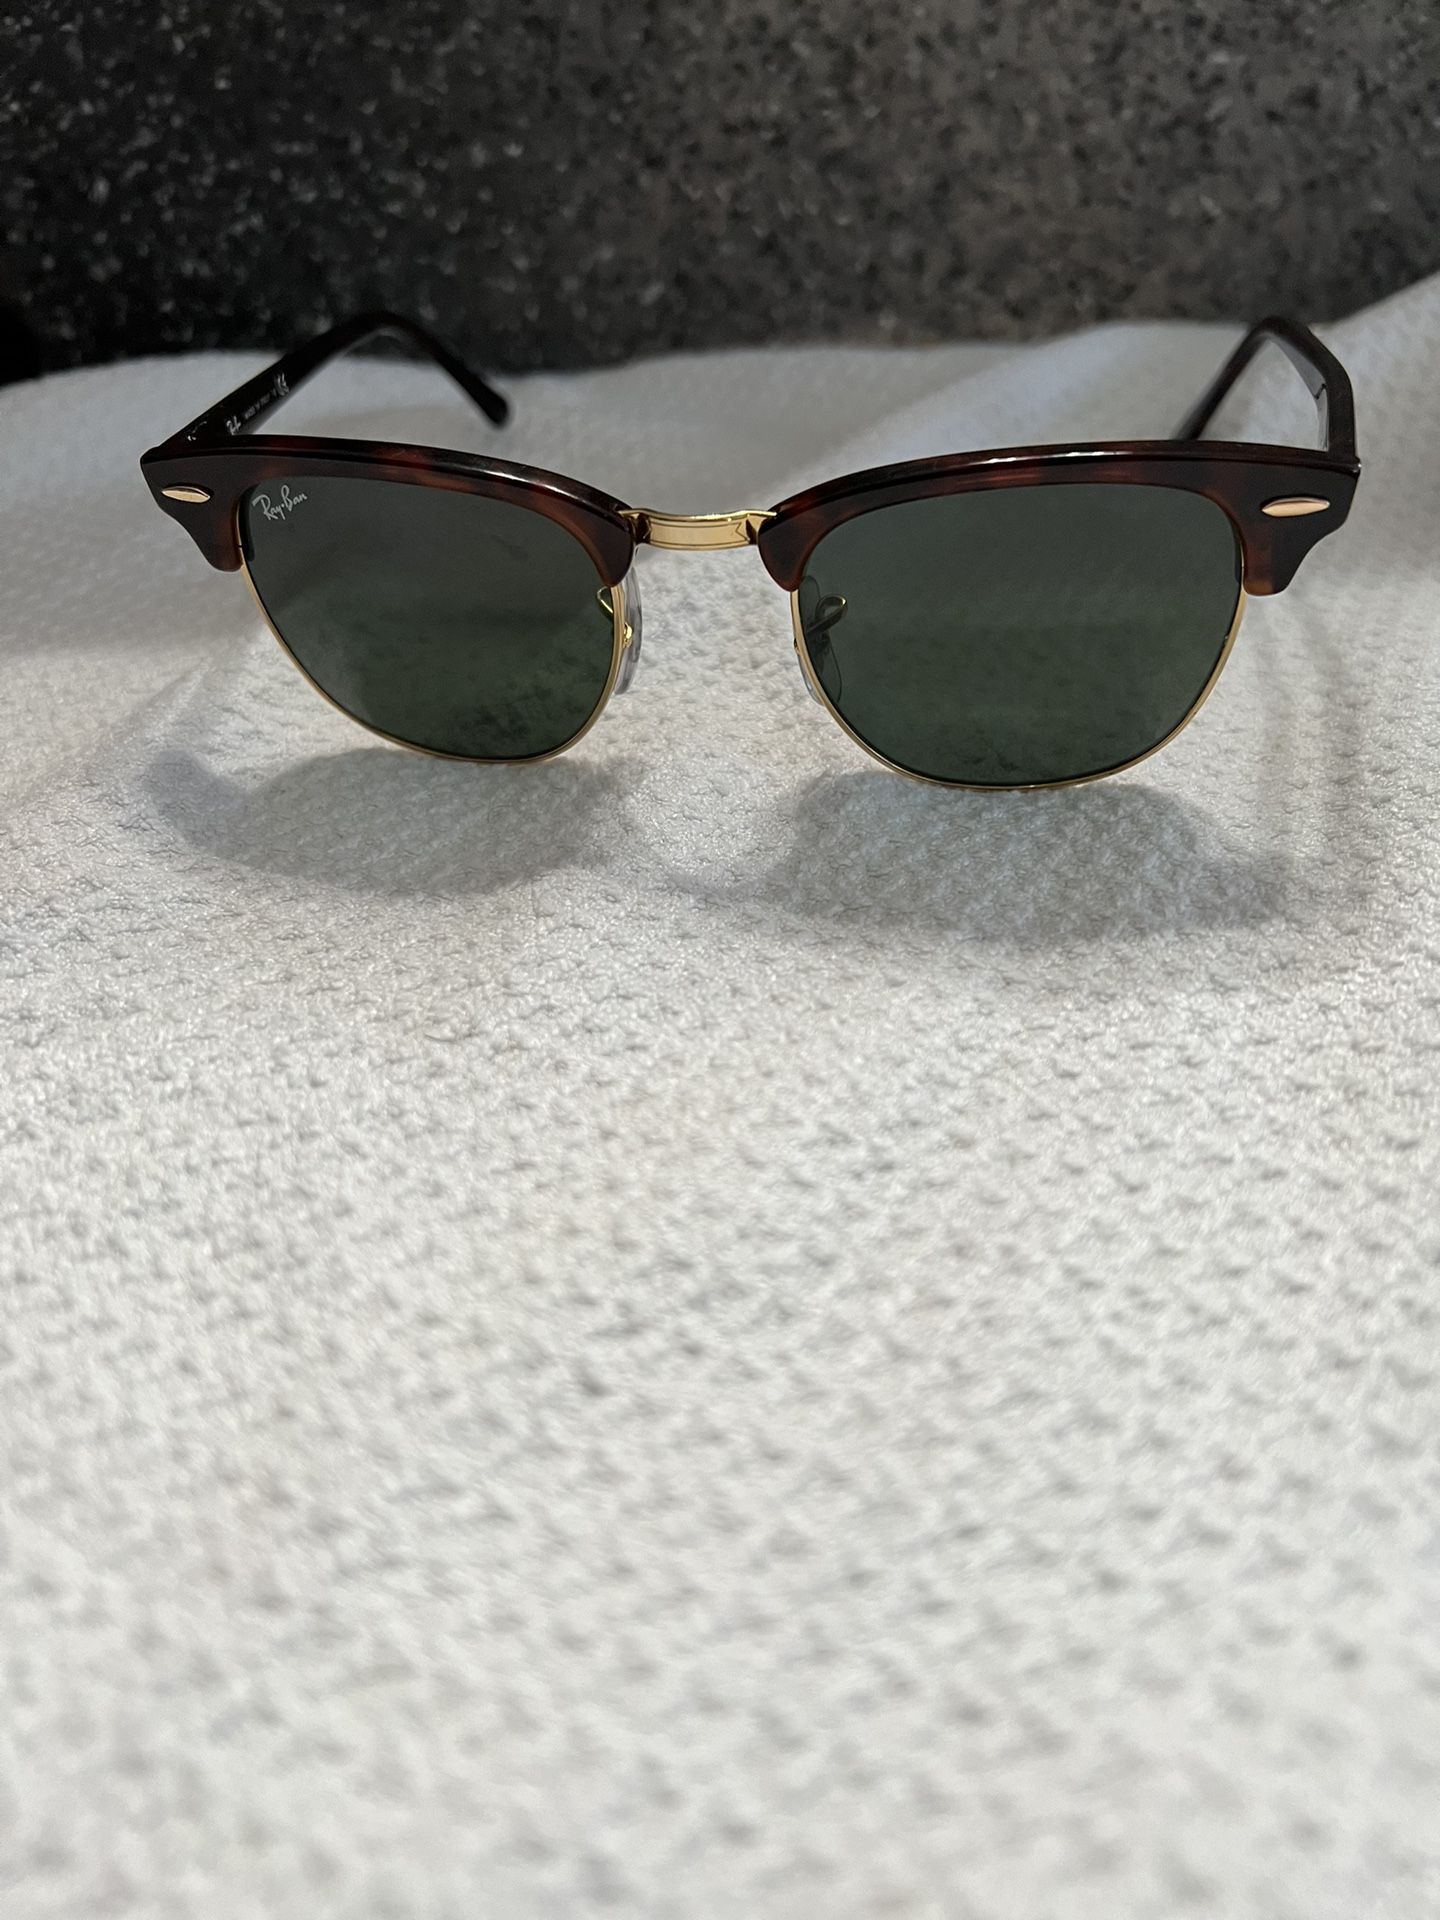 Ray-Ban Clubmaster Classic Sunglasses 